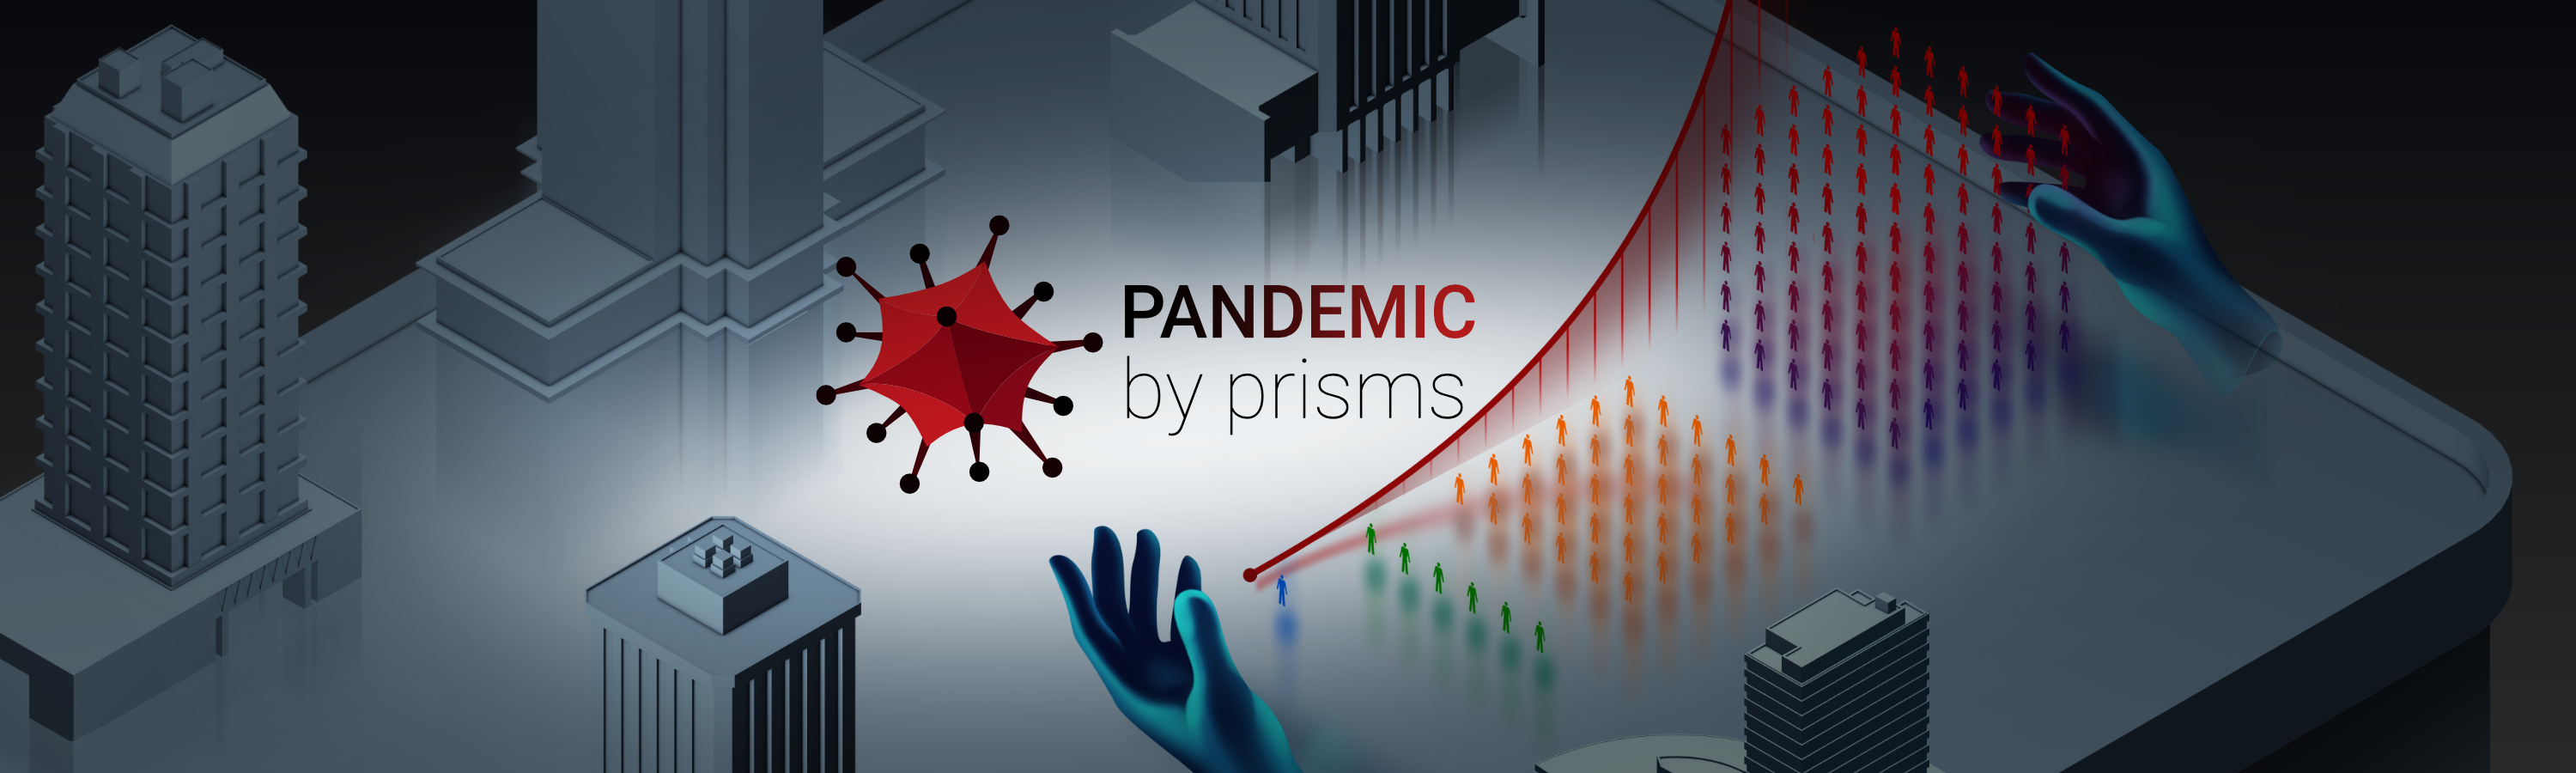 Pandemic by Prisms